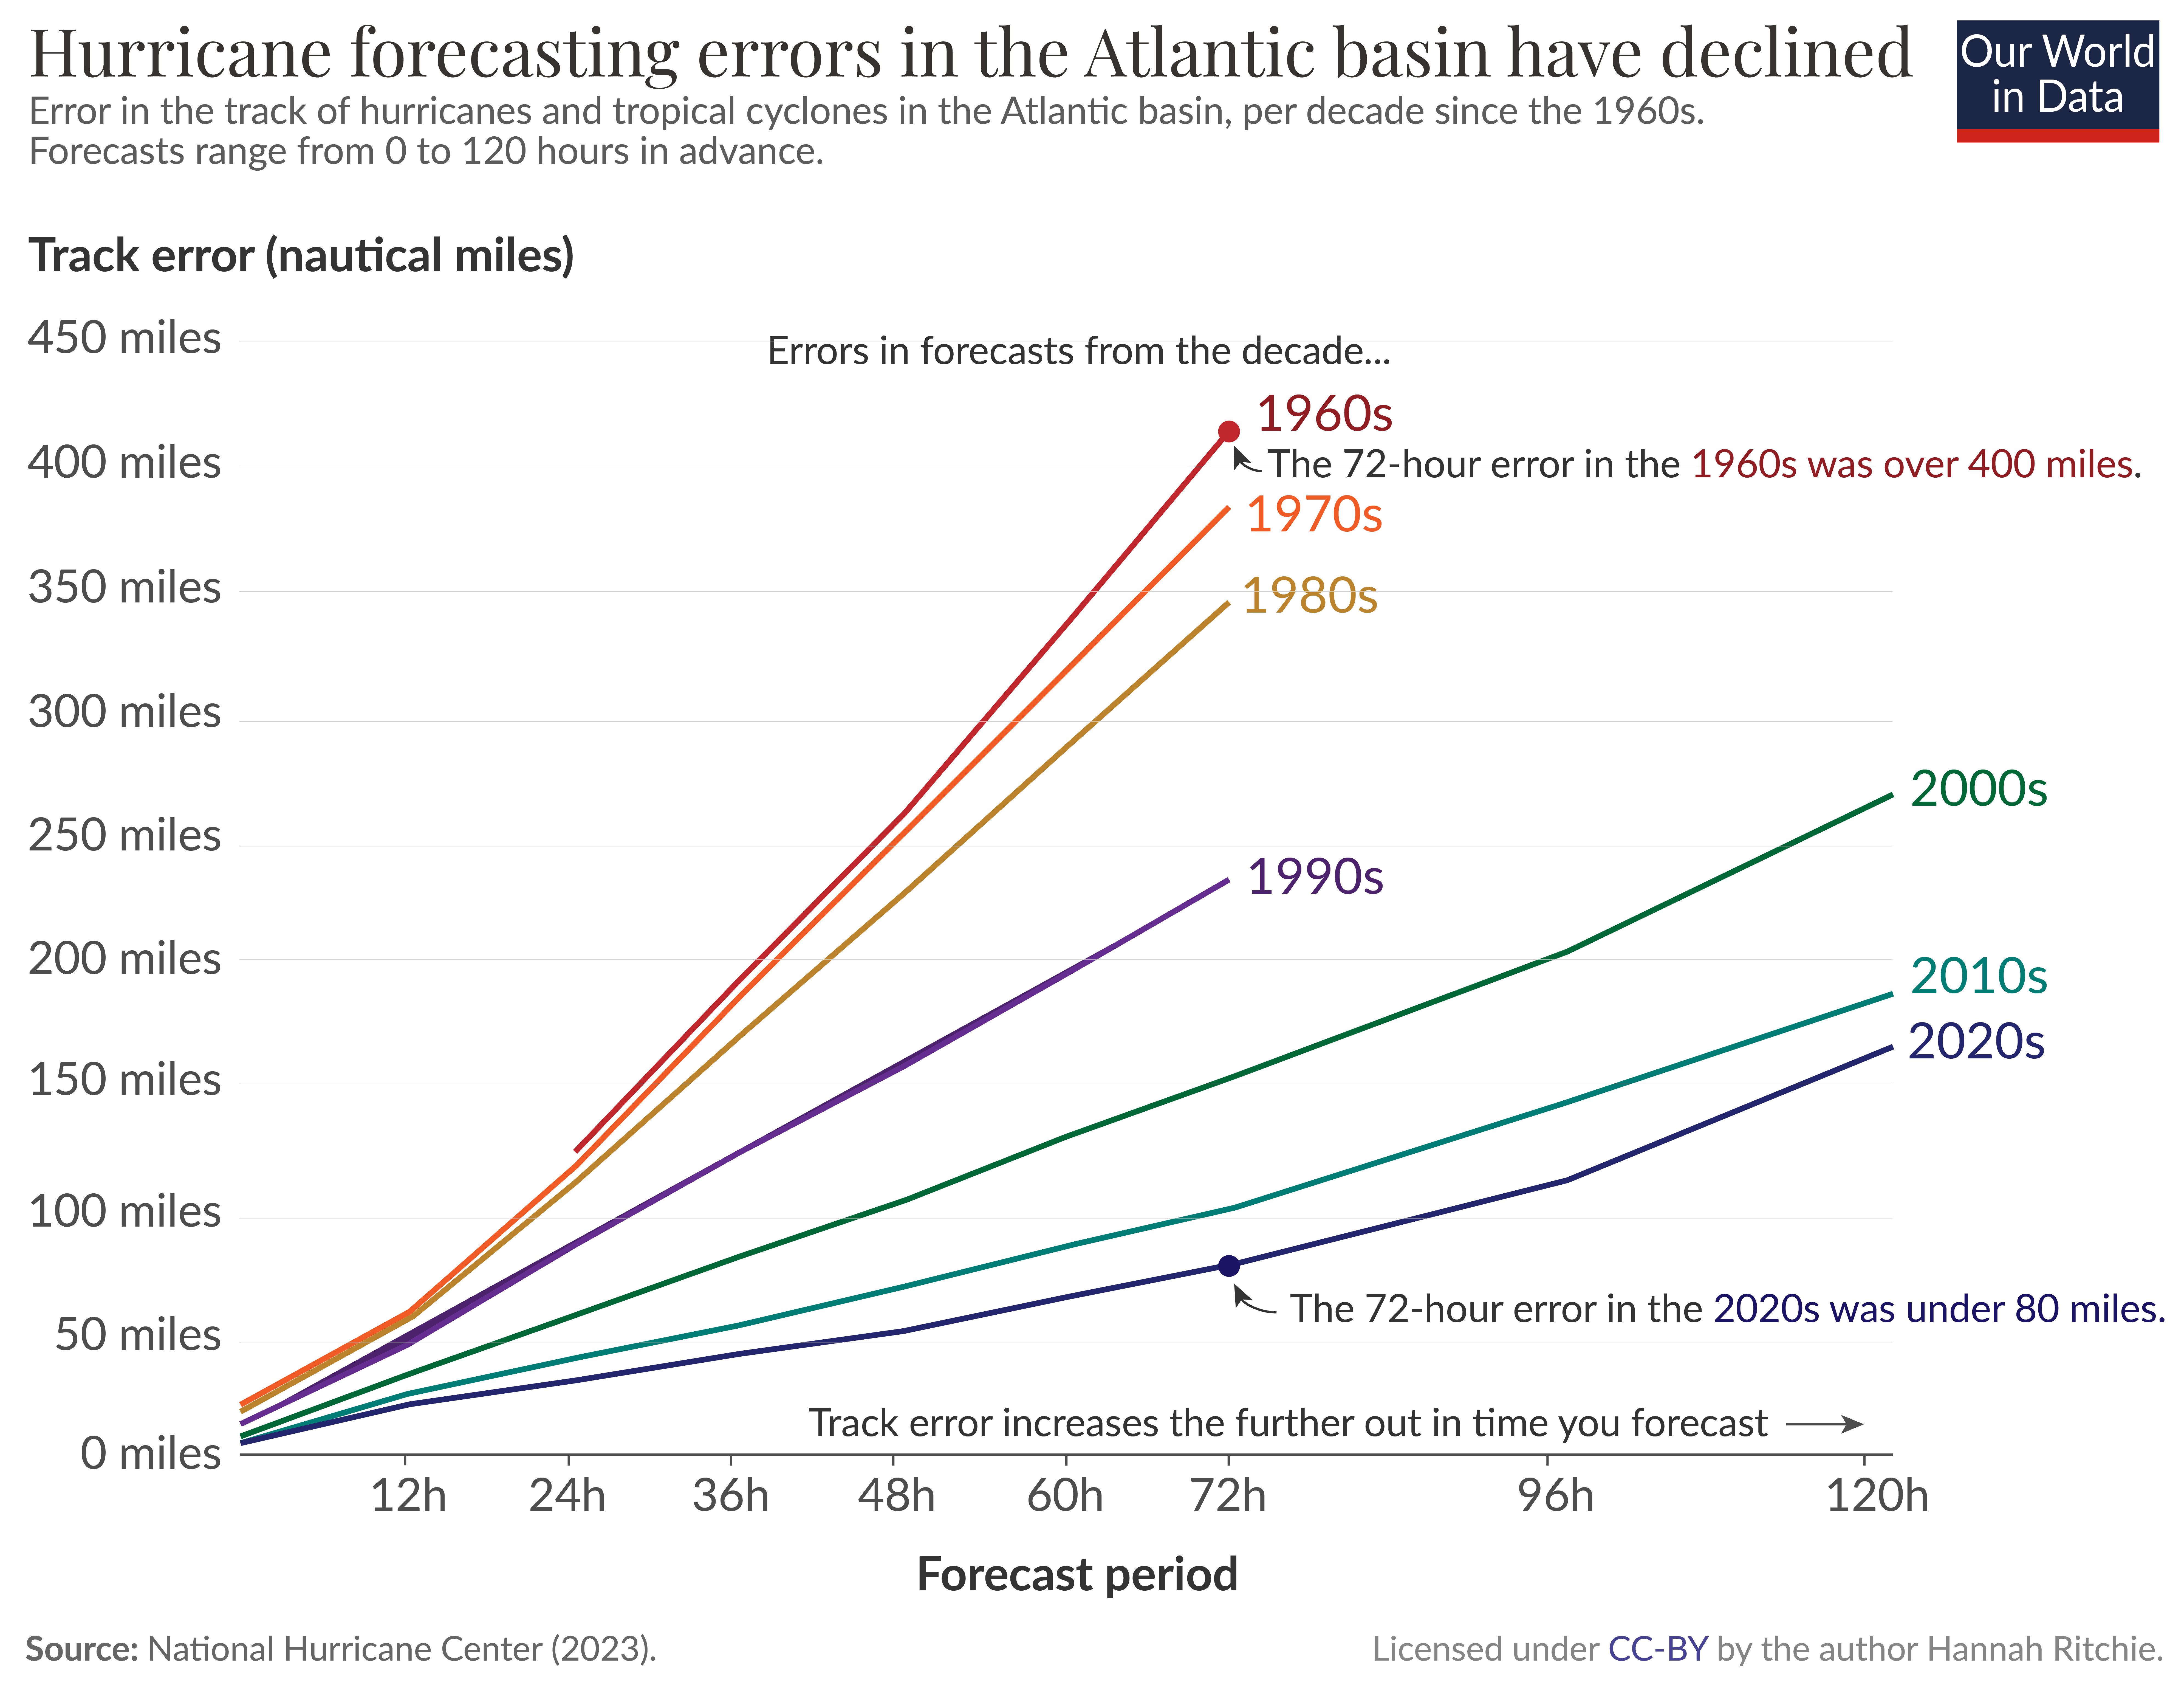 Line chart showing the reduction in hurricane forecasting errors from the 1960s to the 2020s. This has improved for very short- and medium-term forecasts.